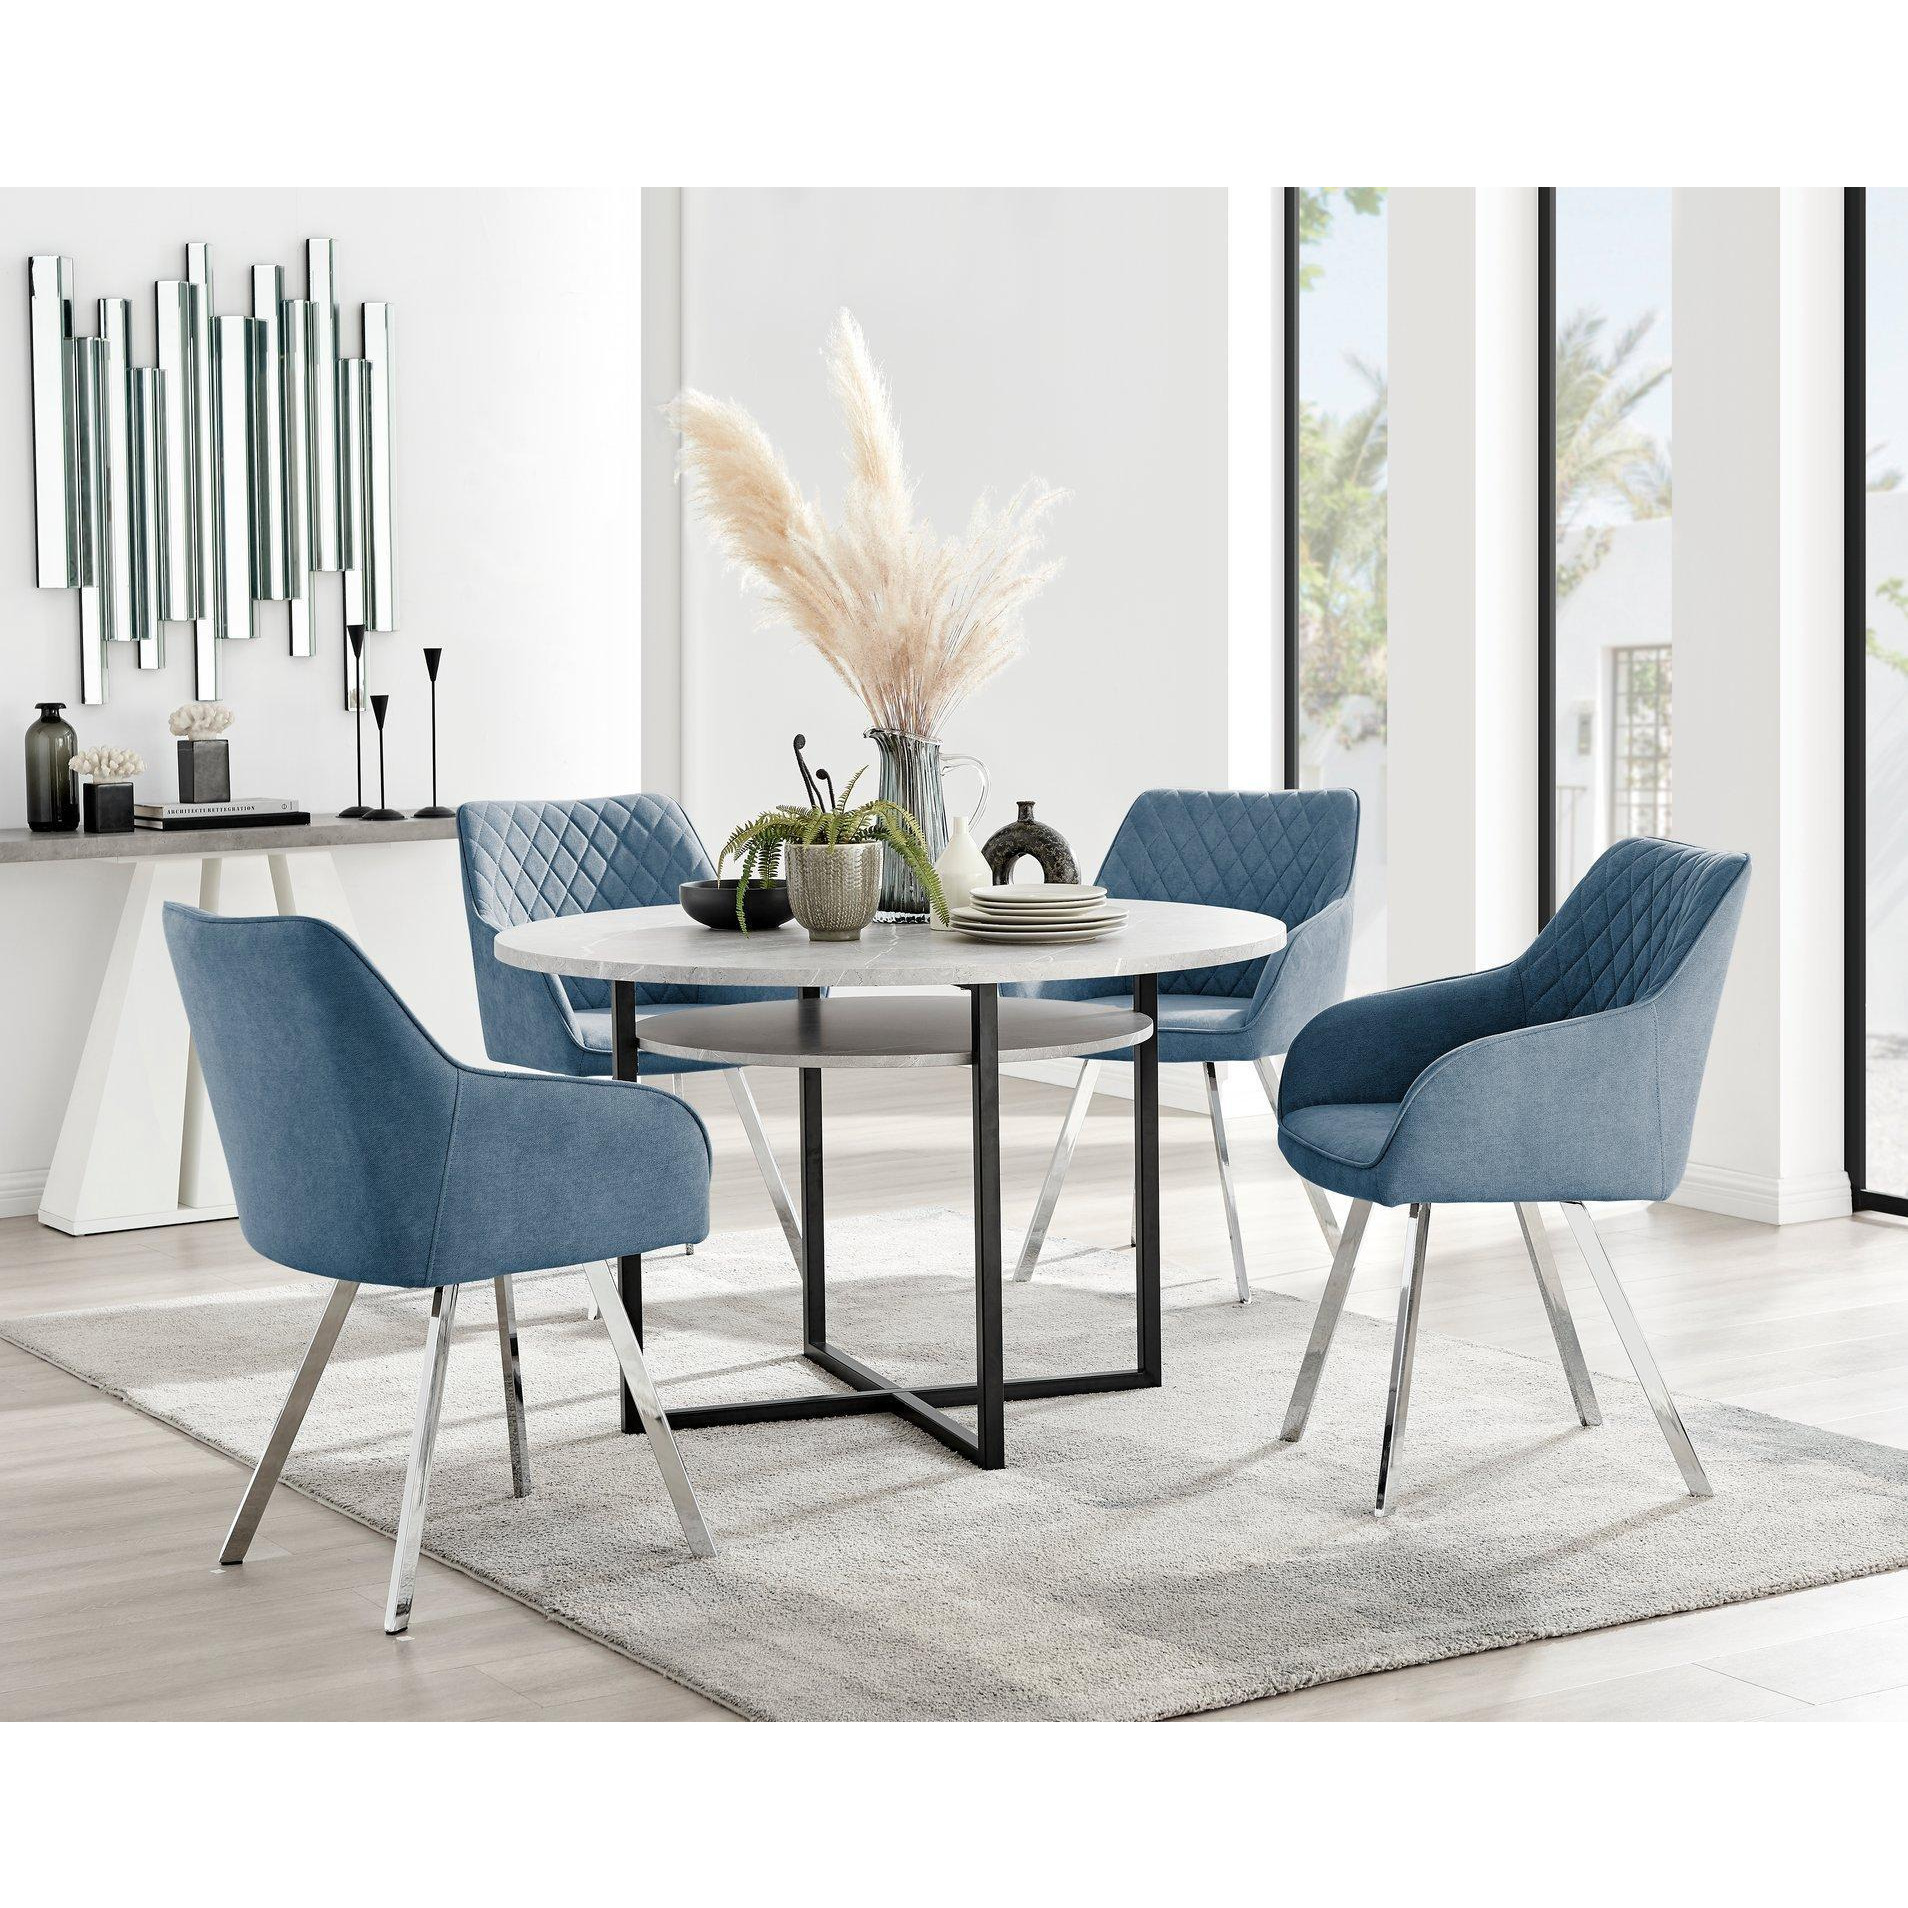 Adley Grey Concrete Effect Round Dining Table & 4 Falun Silver Leg Fabric Chairs - image 1